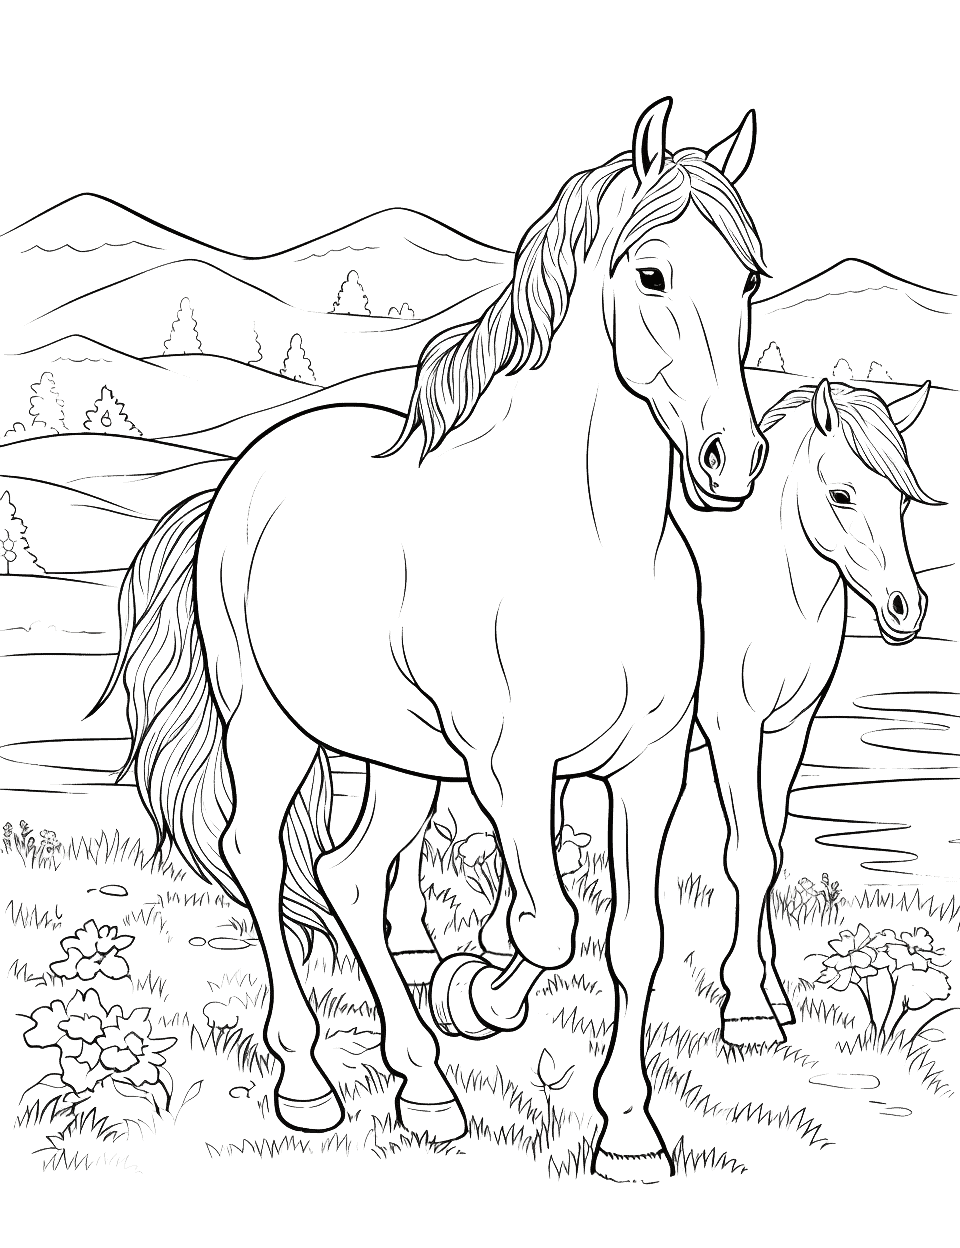 Full Page Horse Family Coloring - A full-page image of a horse family – stallion and mare – in their natural habitat.